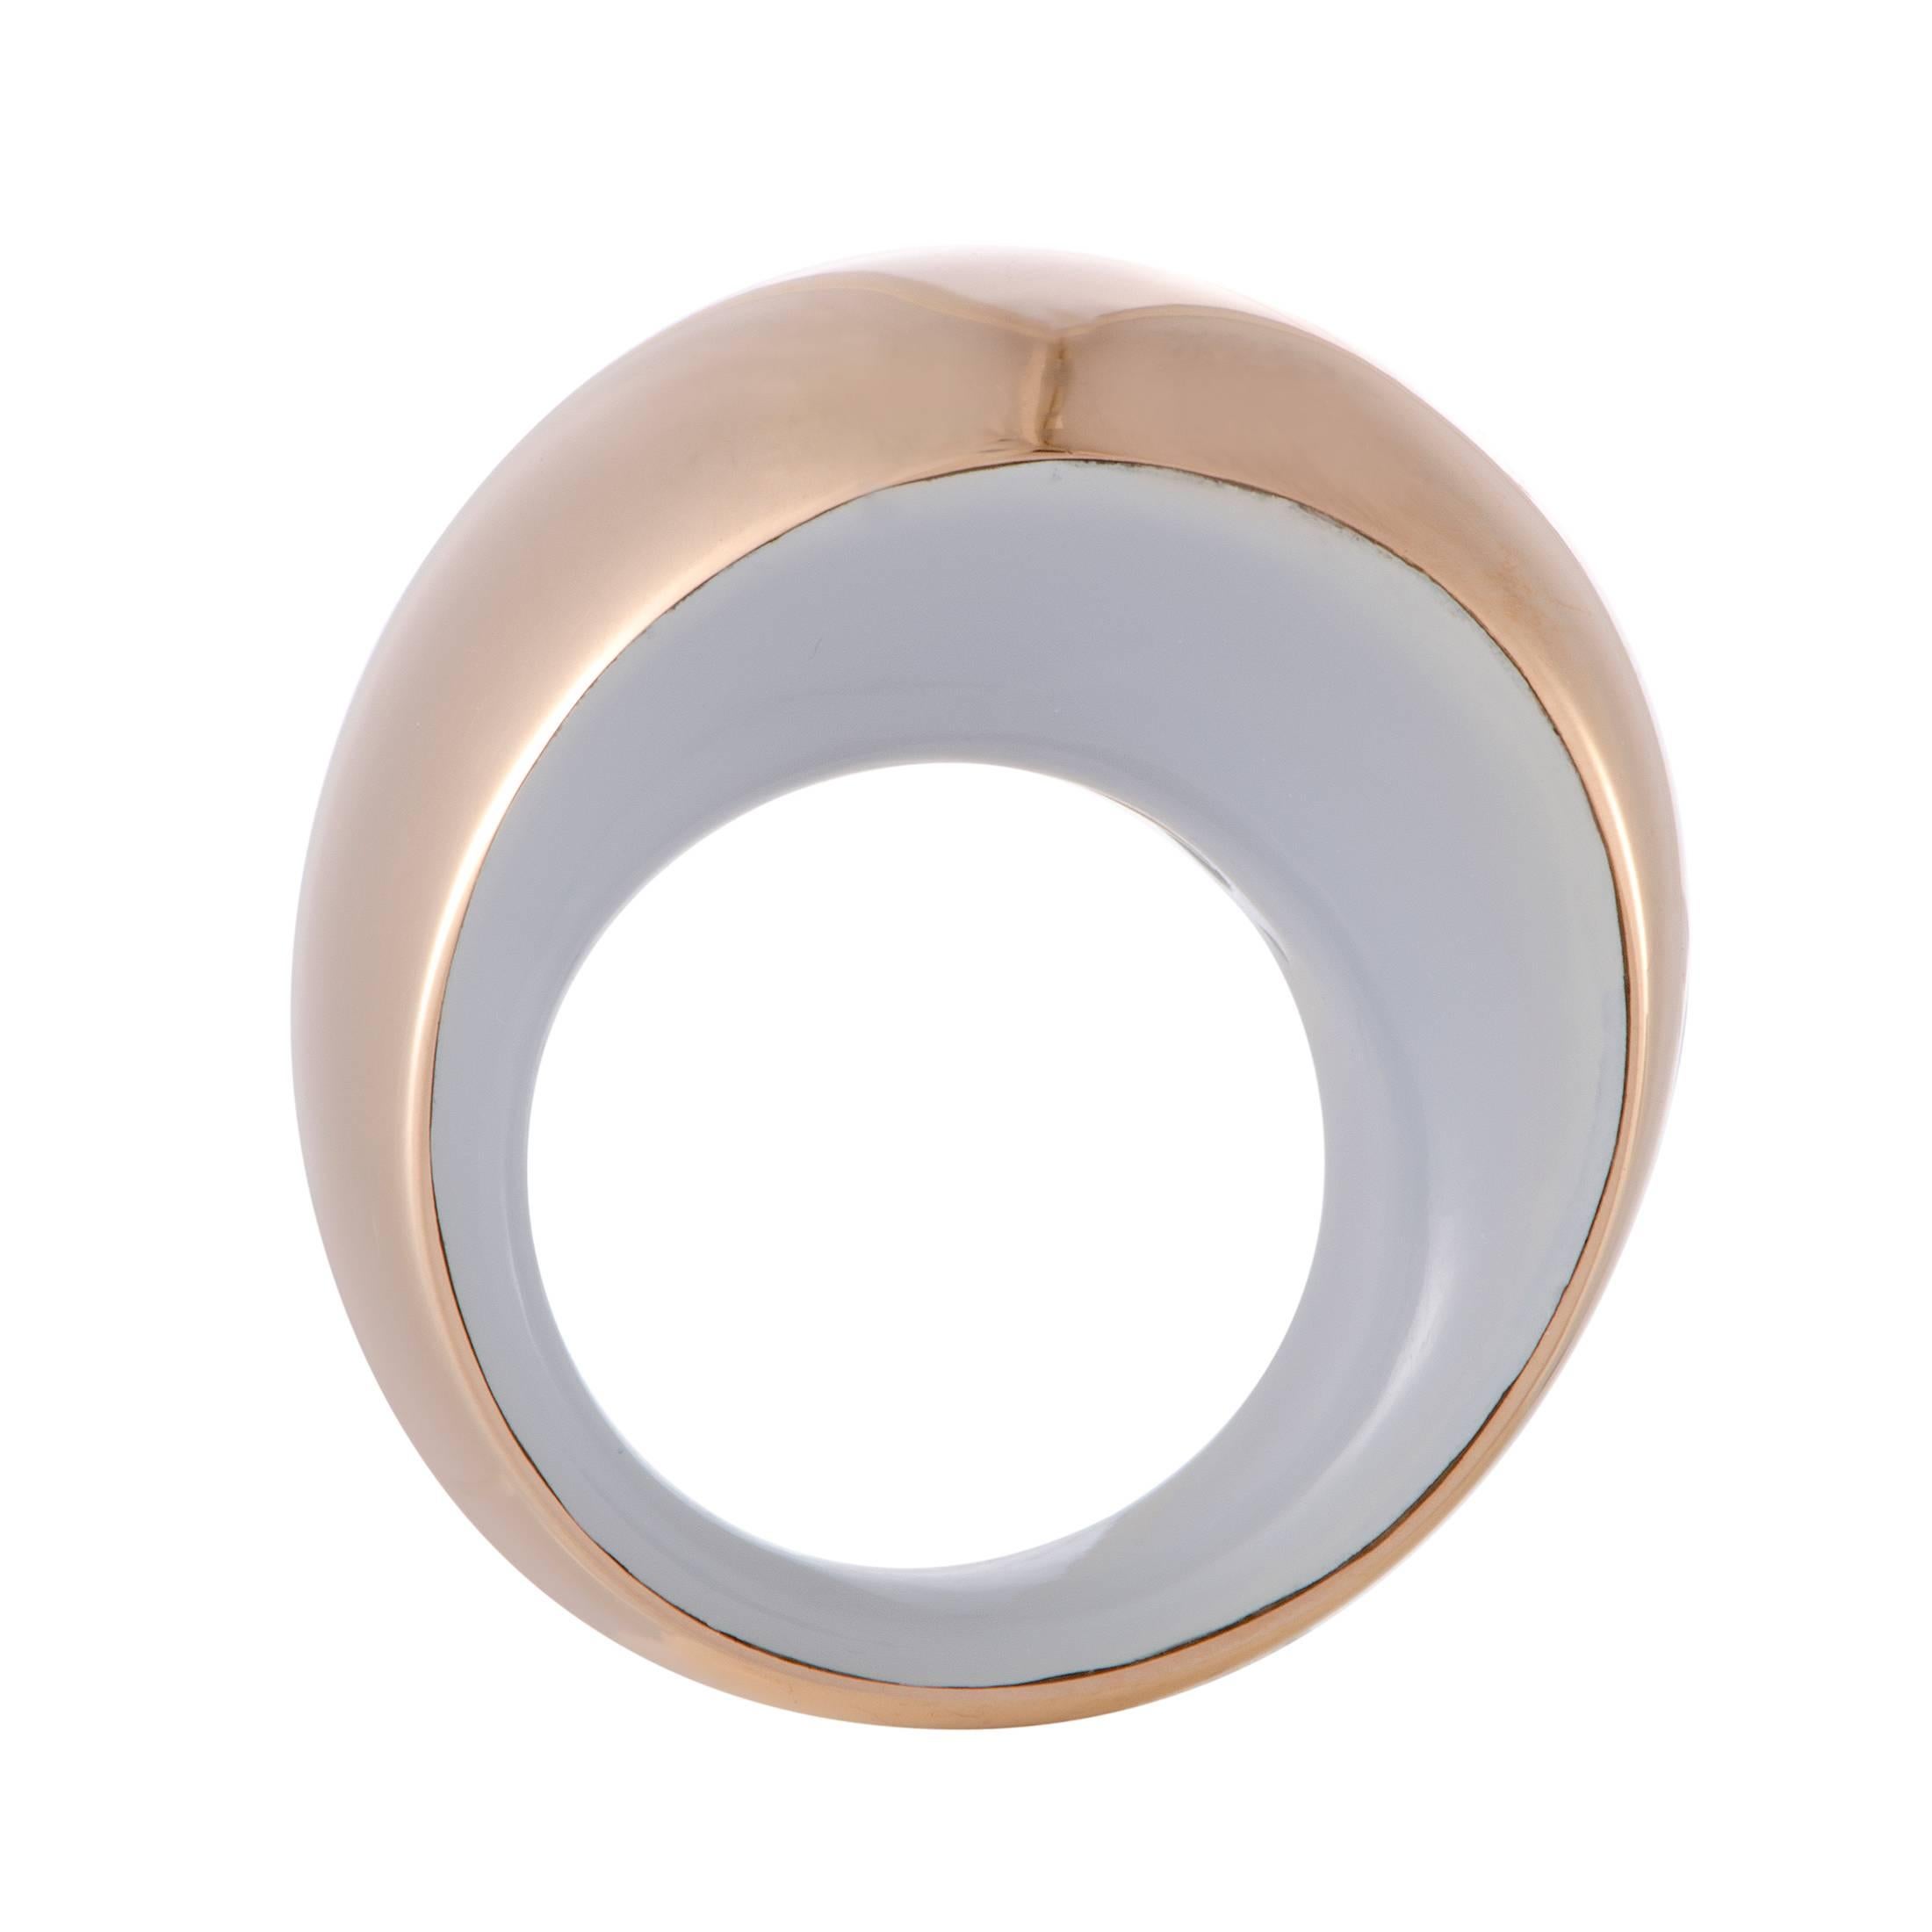 Beautifully designed in 18K rose gold, this spectacular ring by Vhernier is effortlessly stunning! Its incredible oval design includes the use of a beautiful chalcedony stone that adds an extravagant appeal to the splendid ring.
Ring Size: 5.75
Ring